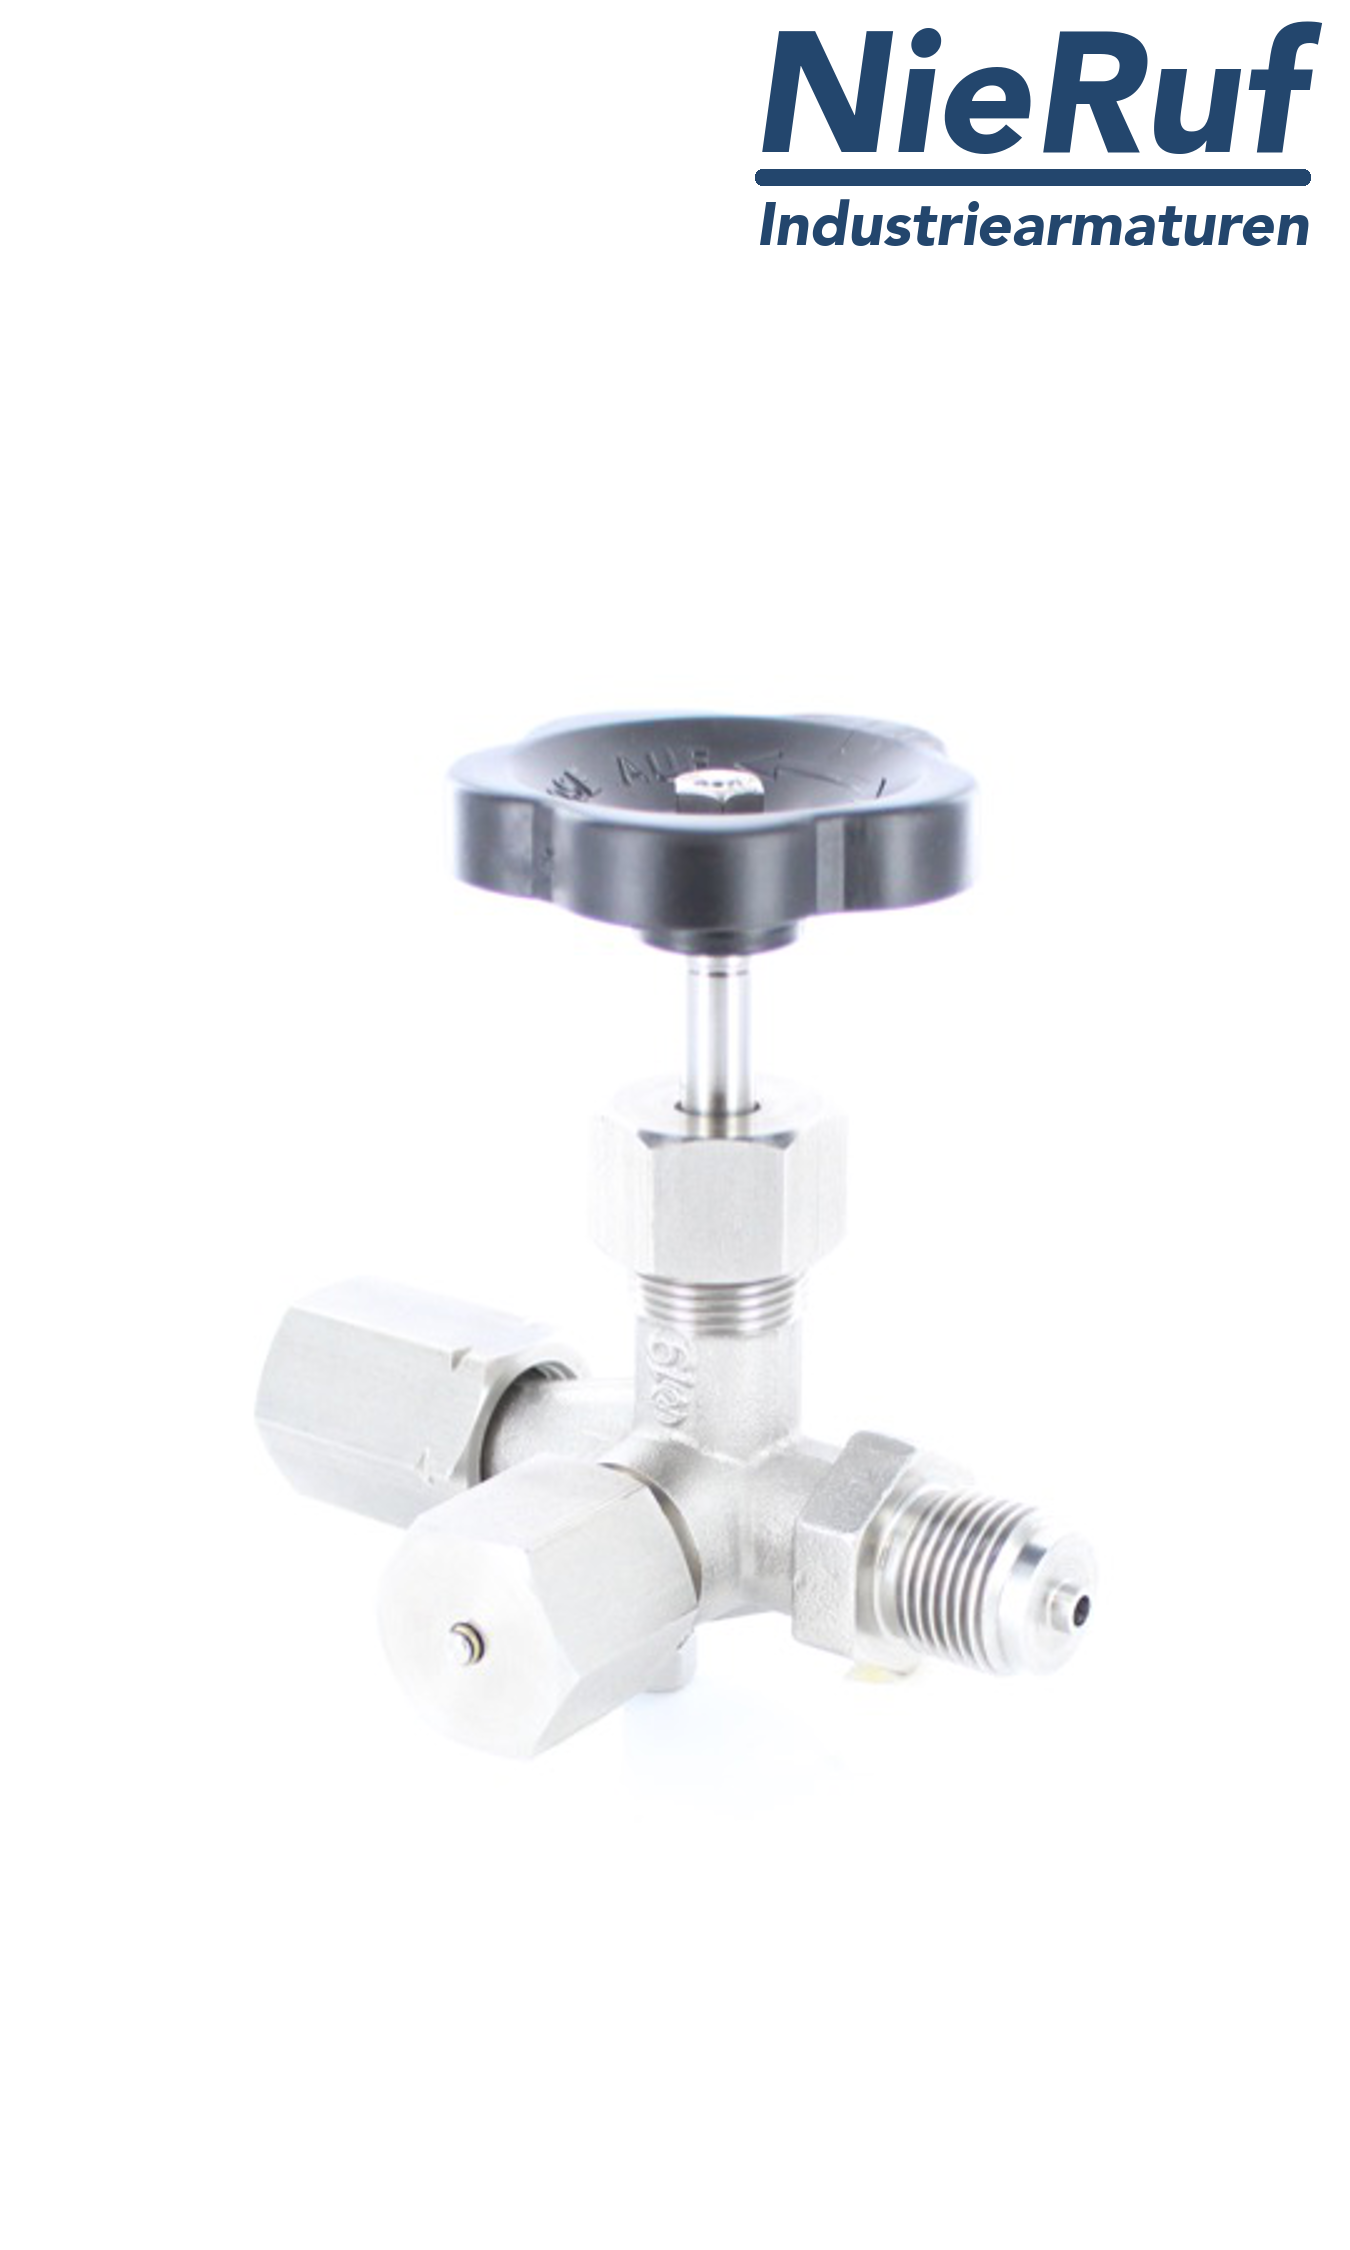 manometer gauge valves male thread x adapter for instrument holder with nut adjustable x test connector M20x1,5 DIN 16271 stainless steel 1.4571 400 bar